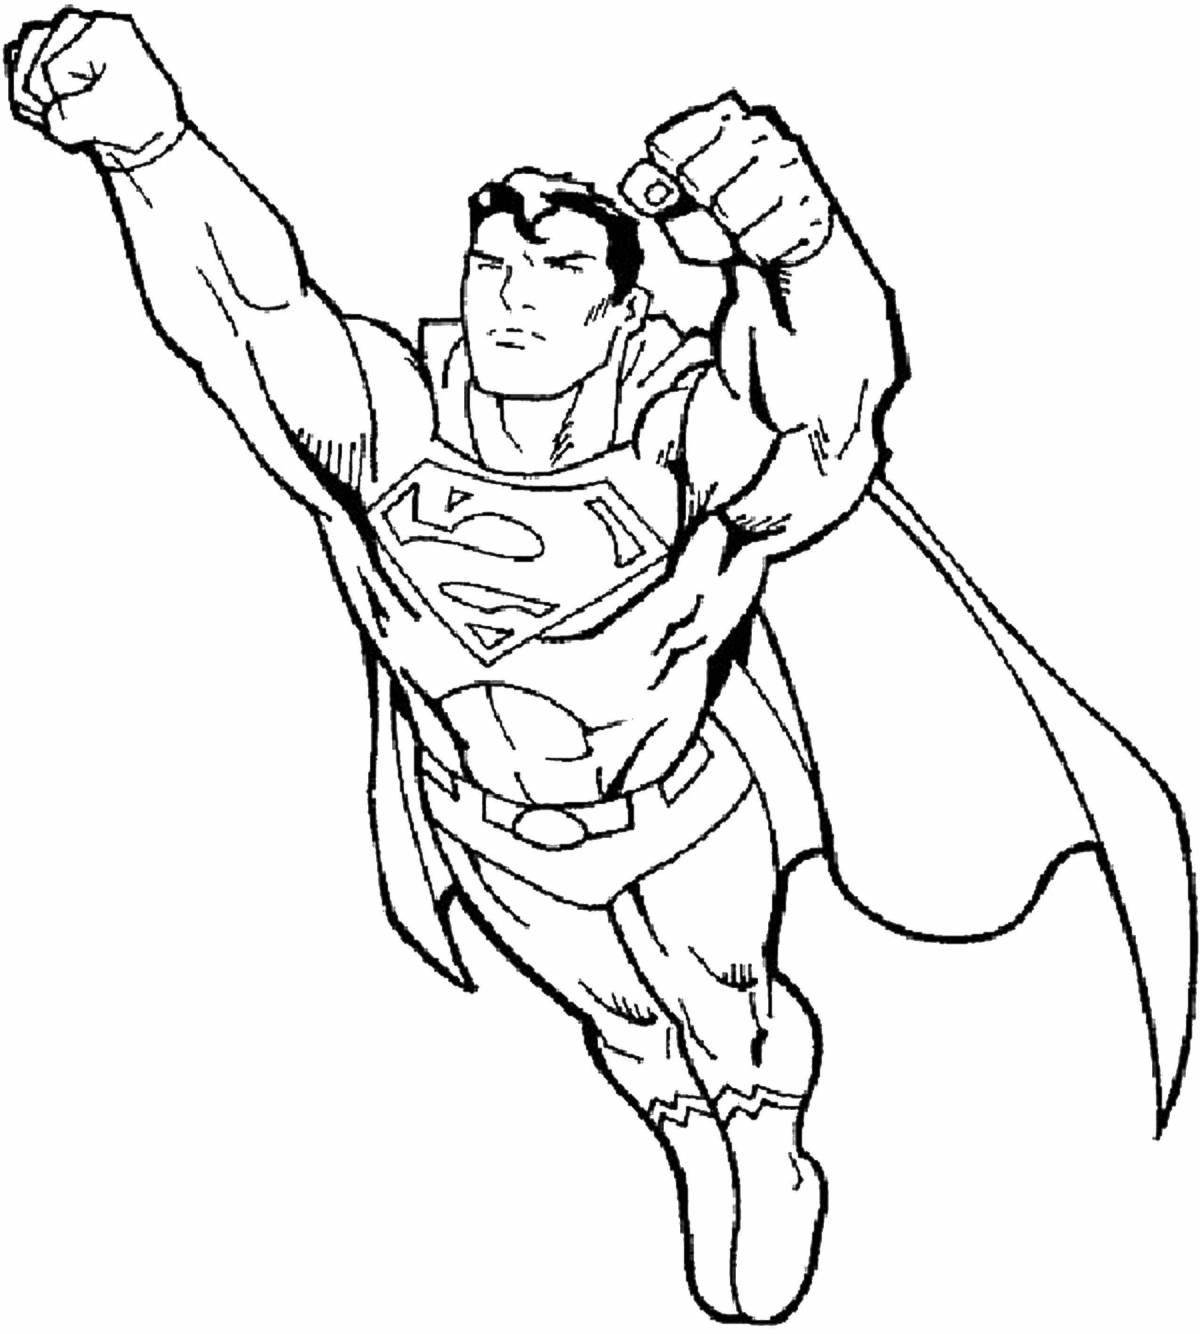 Amazing superhero coloring pages for 5 year old boys